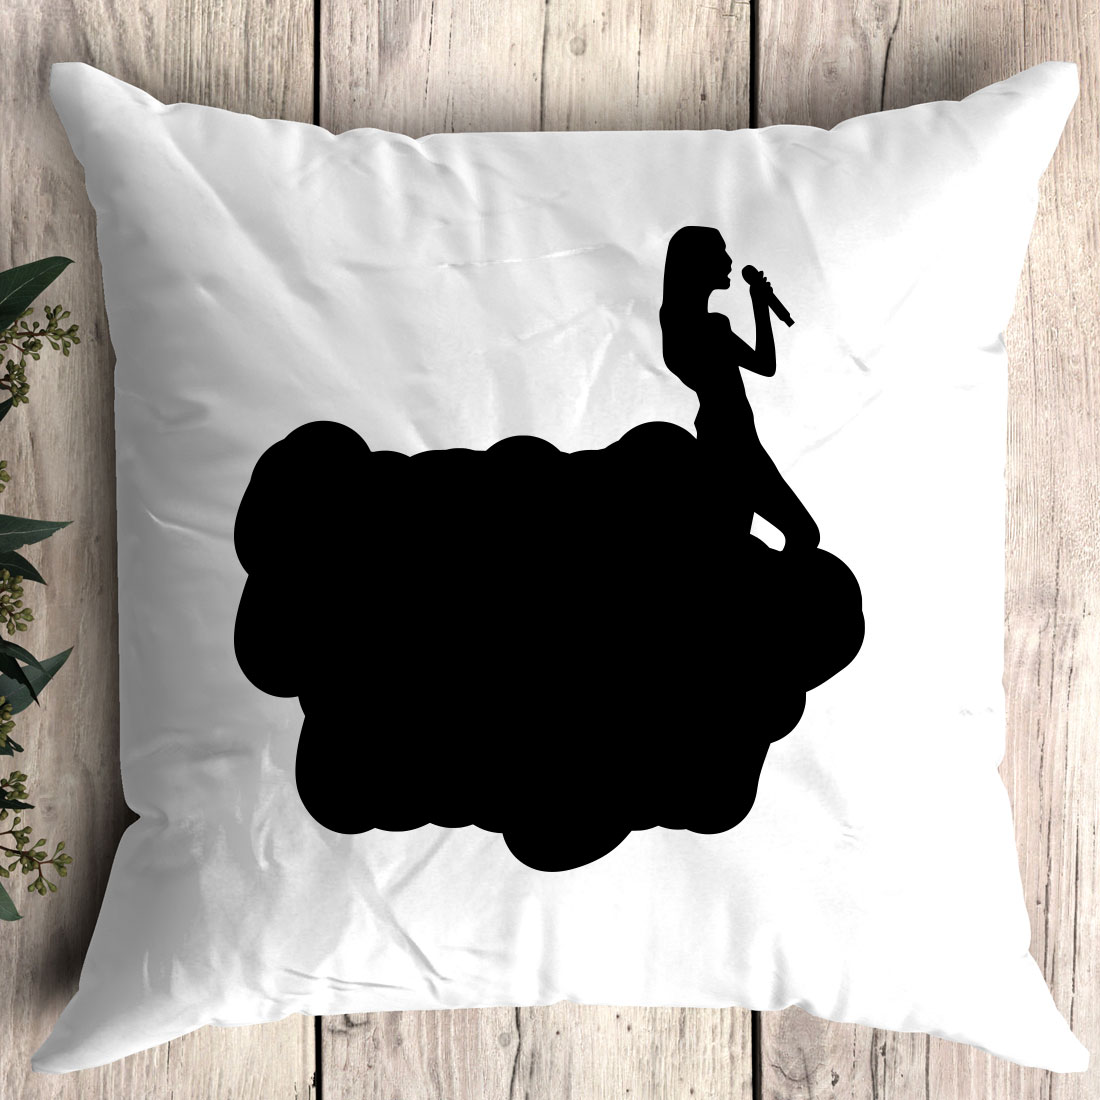 Pillow with a silhouette of a woman on it.